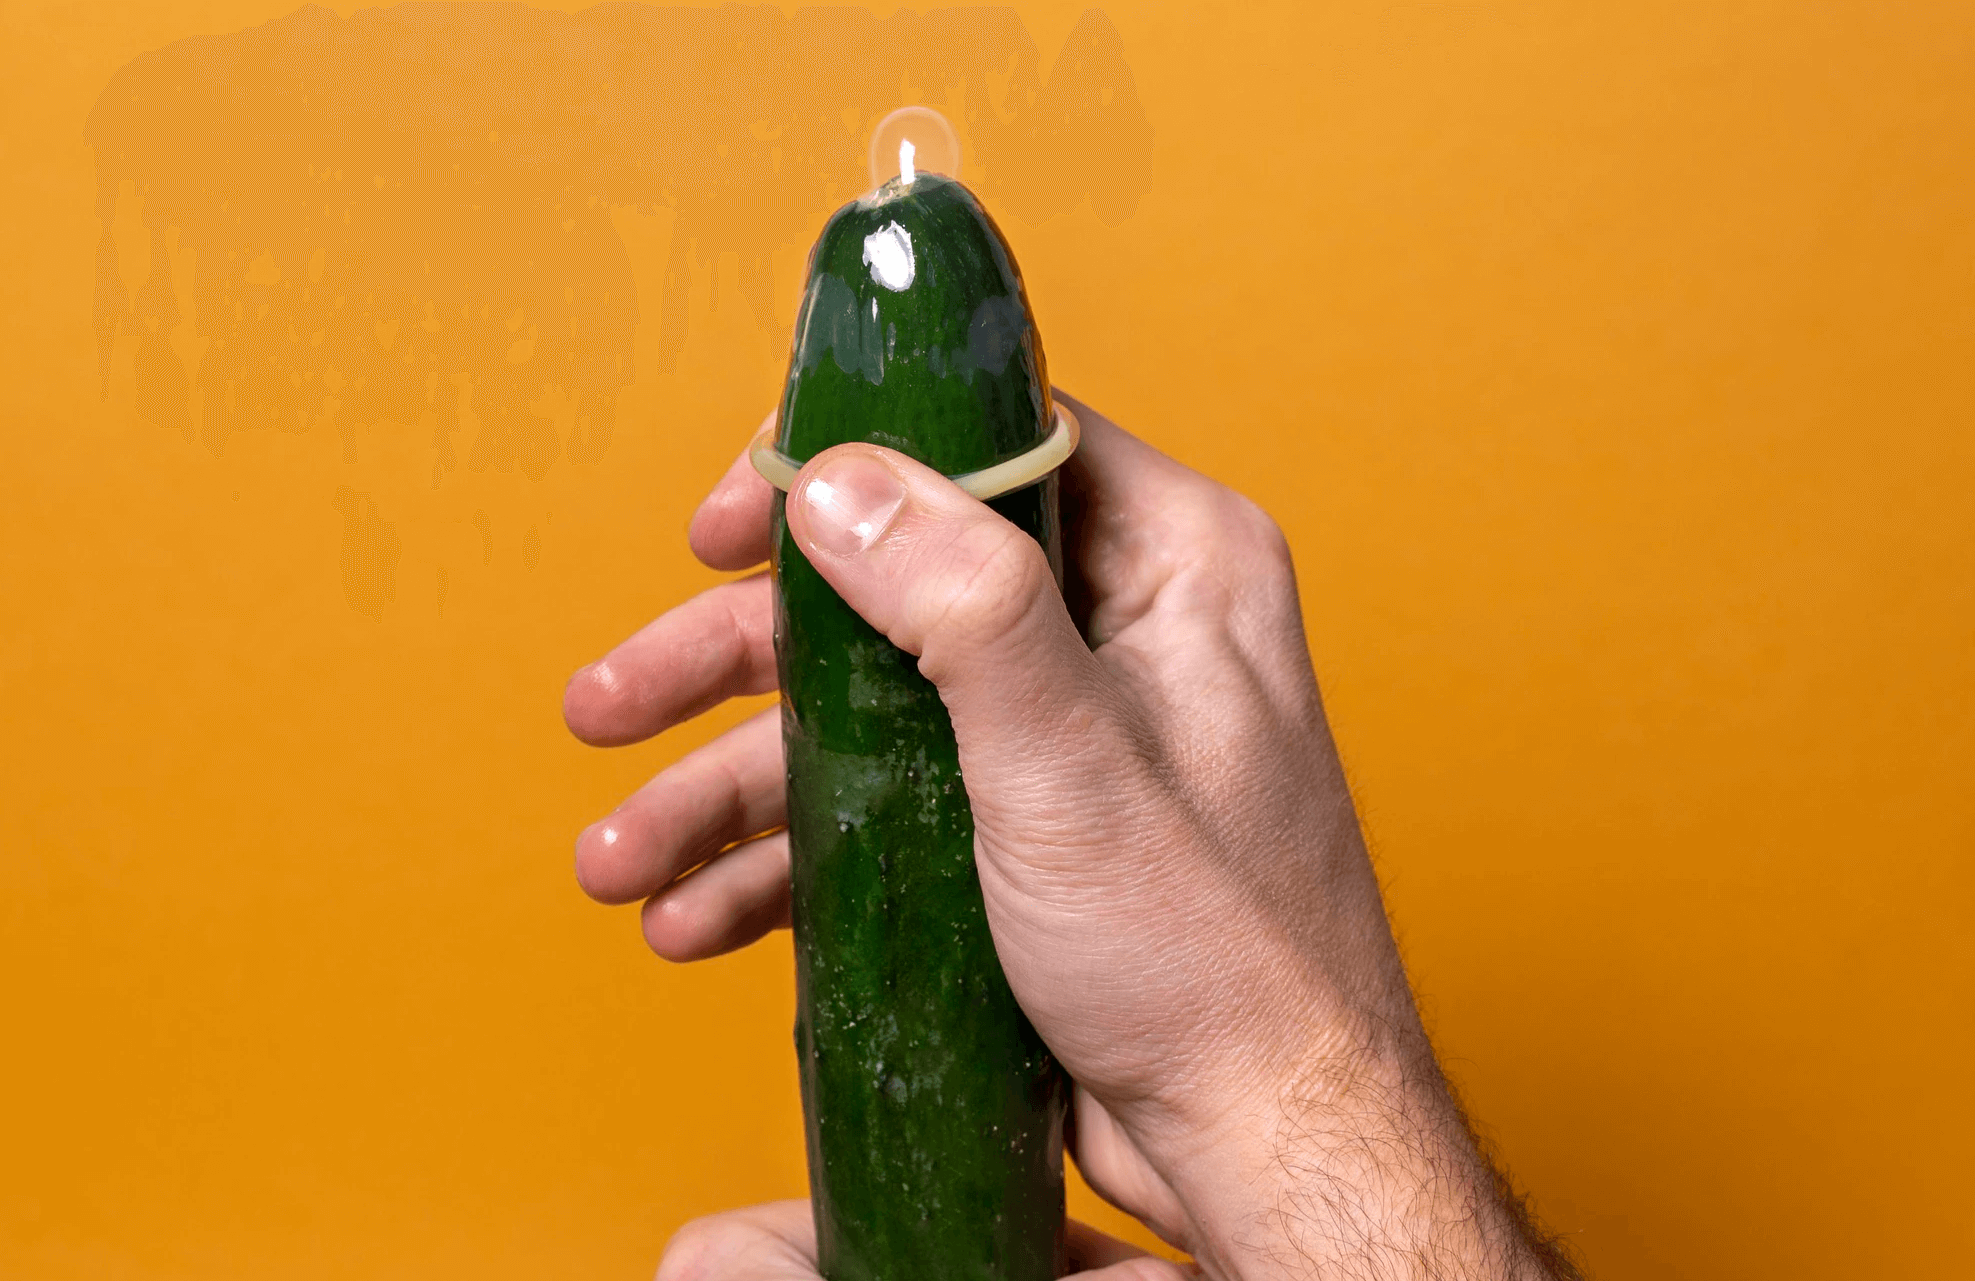 Can i use a cucumber as a sex toy